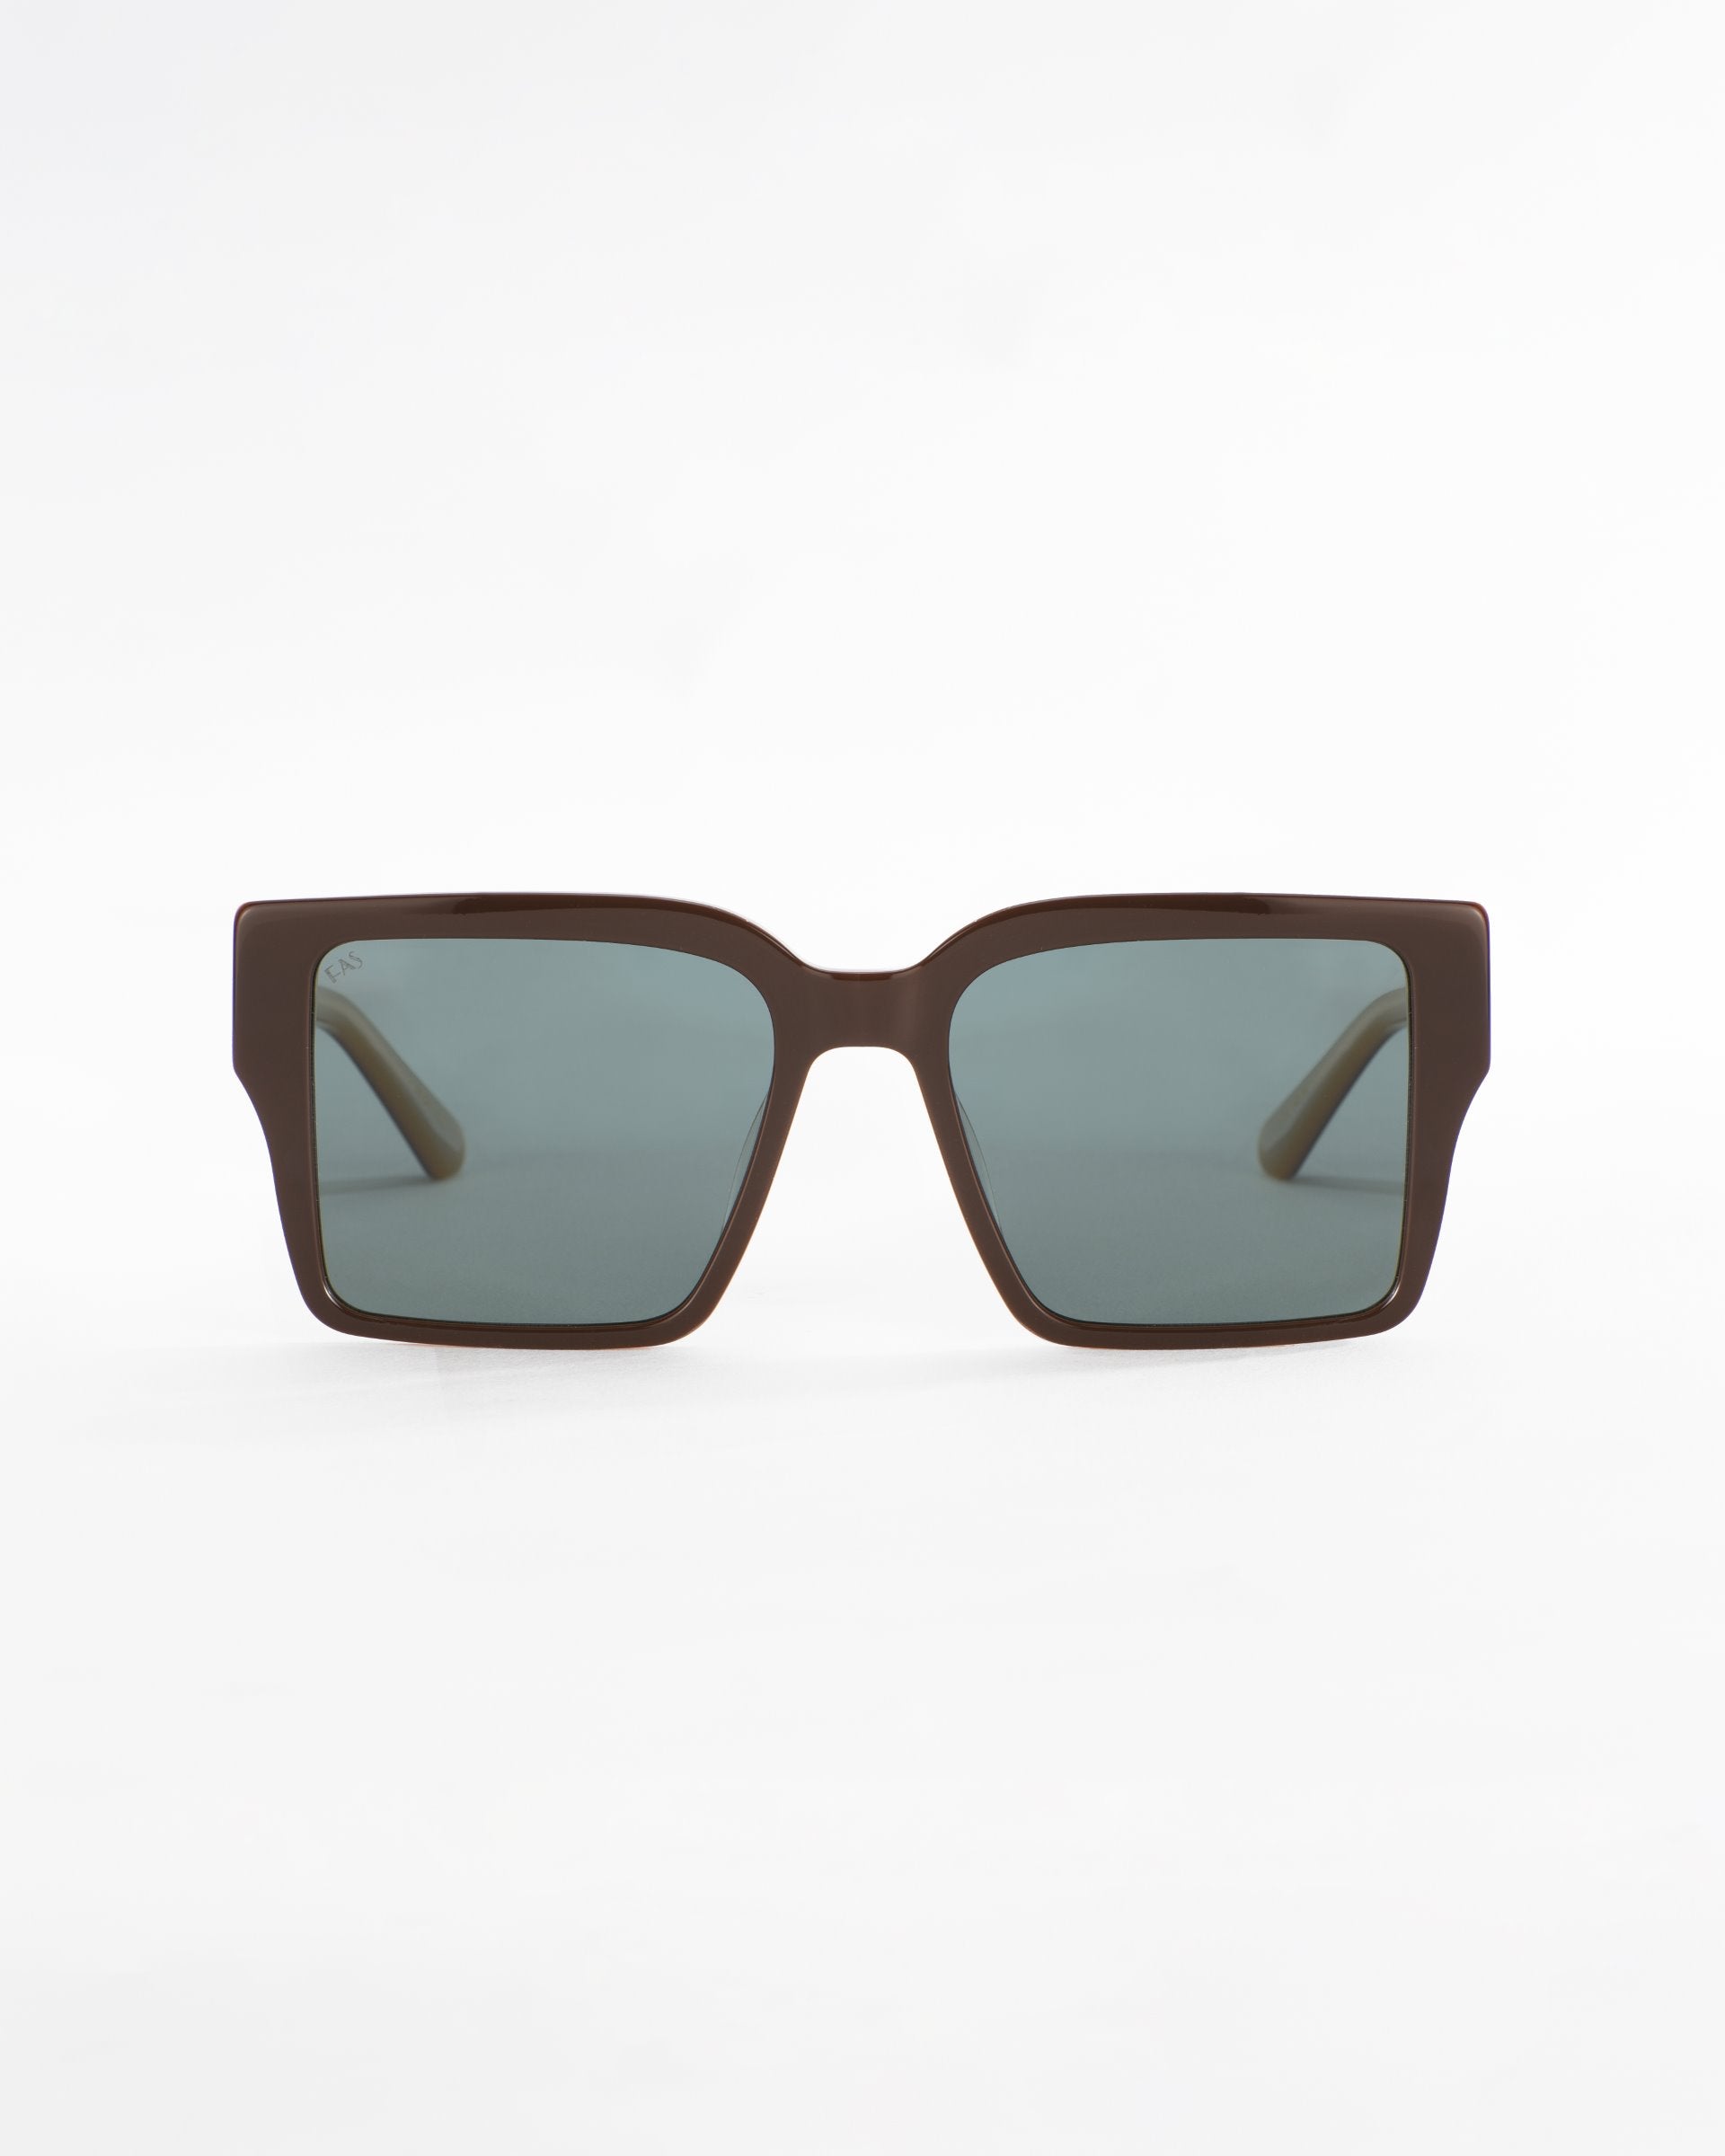 A pair of dark brown, oversized square-framed For Art&#39;s Sake® Castle sunglasses with ultra-lightweight green-tinted lenses displayed against a plain white background. The design is modern and sleek, with wide arms for a bold look.